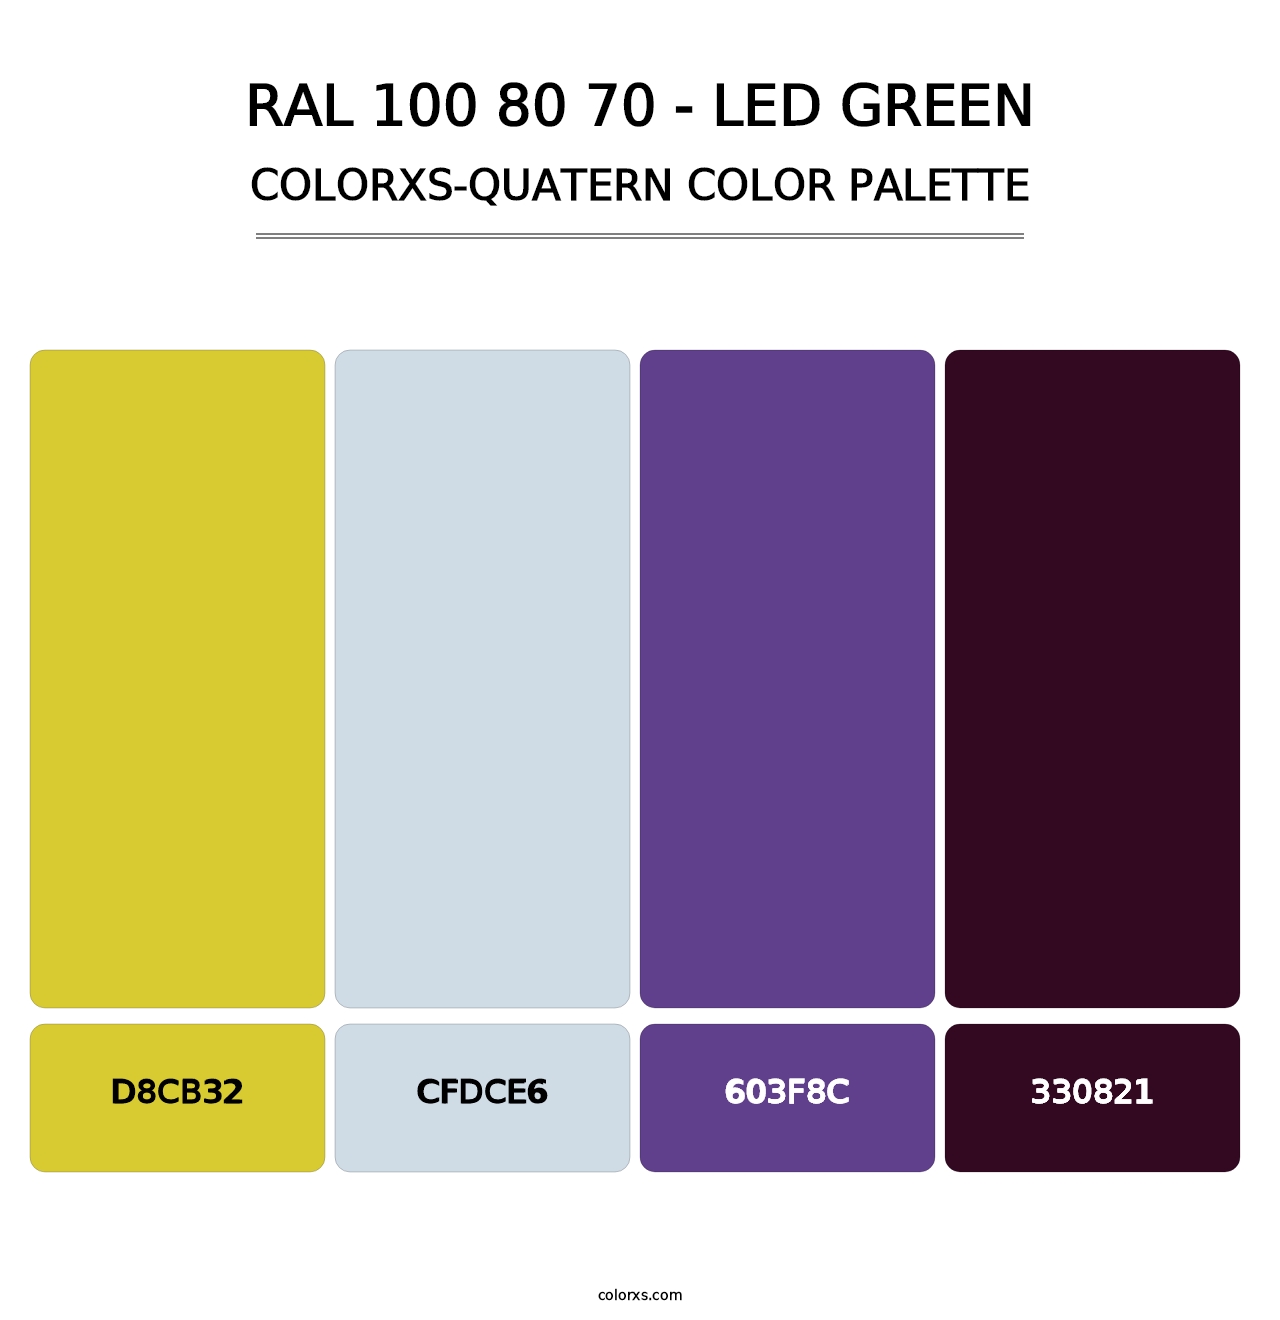 RAL 100 80 70 - LED Green - Colorxs Quatern Palette